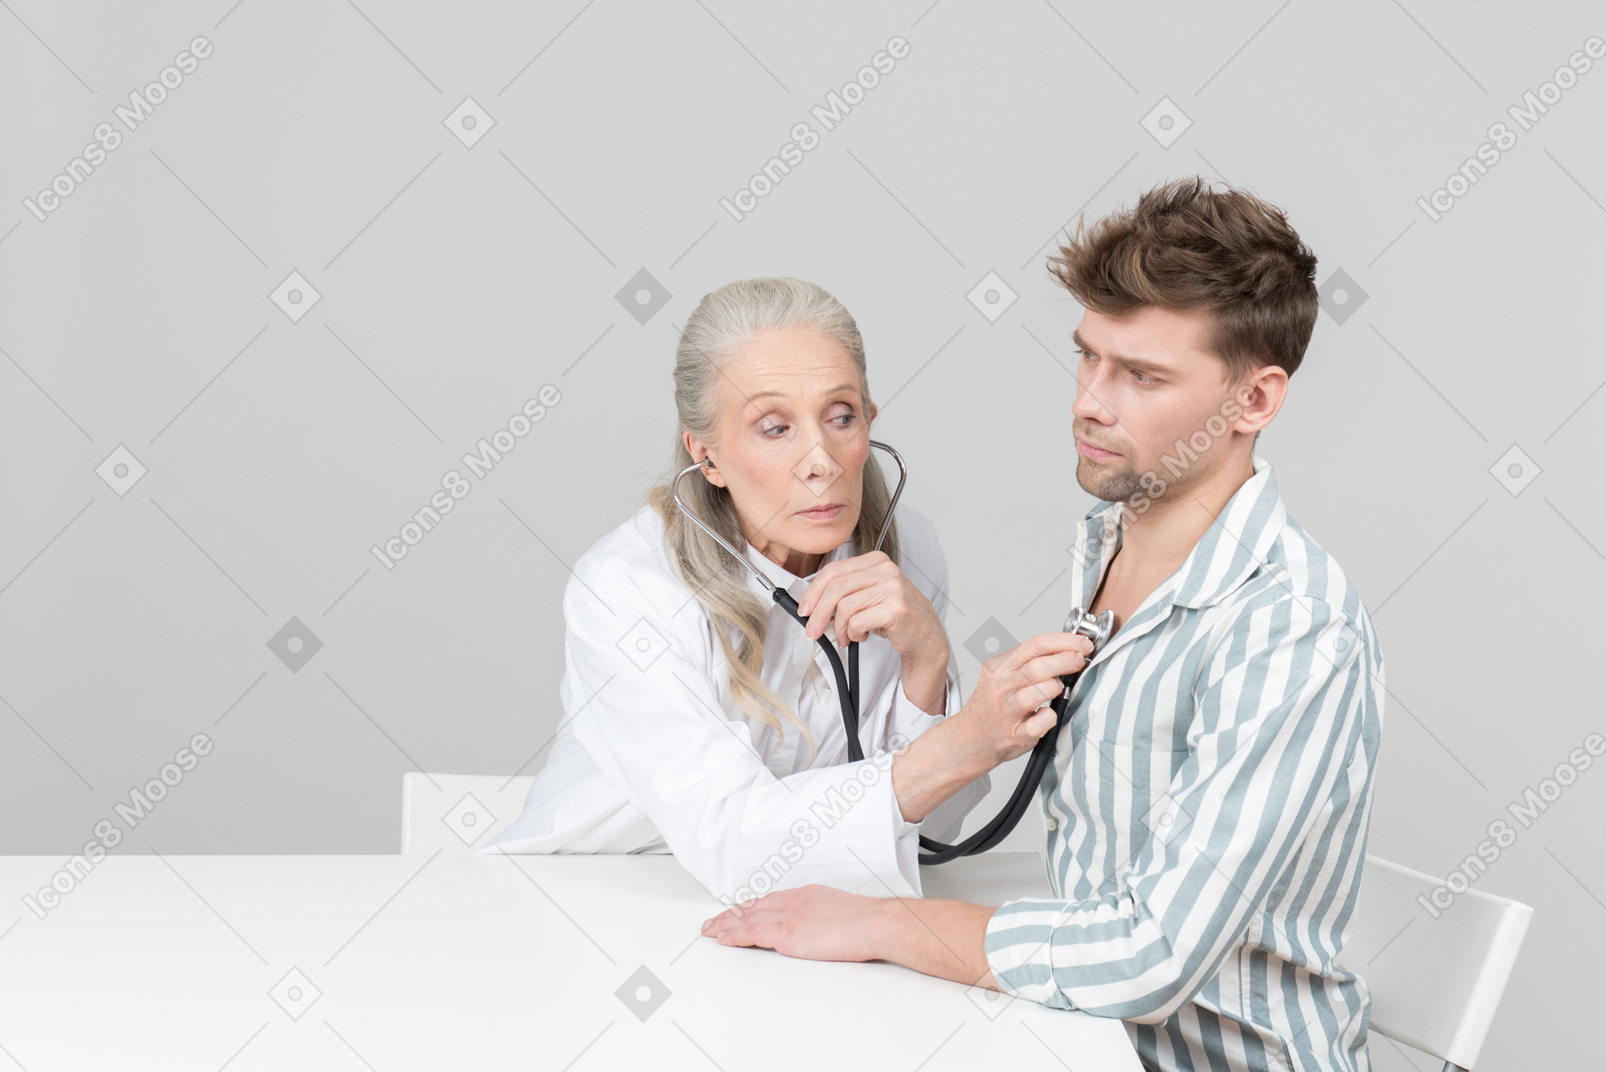 Aged female doctor examining a patient with a stethoscope